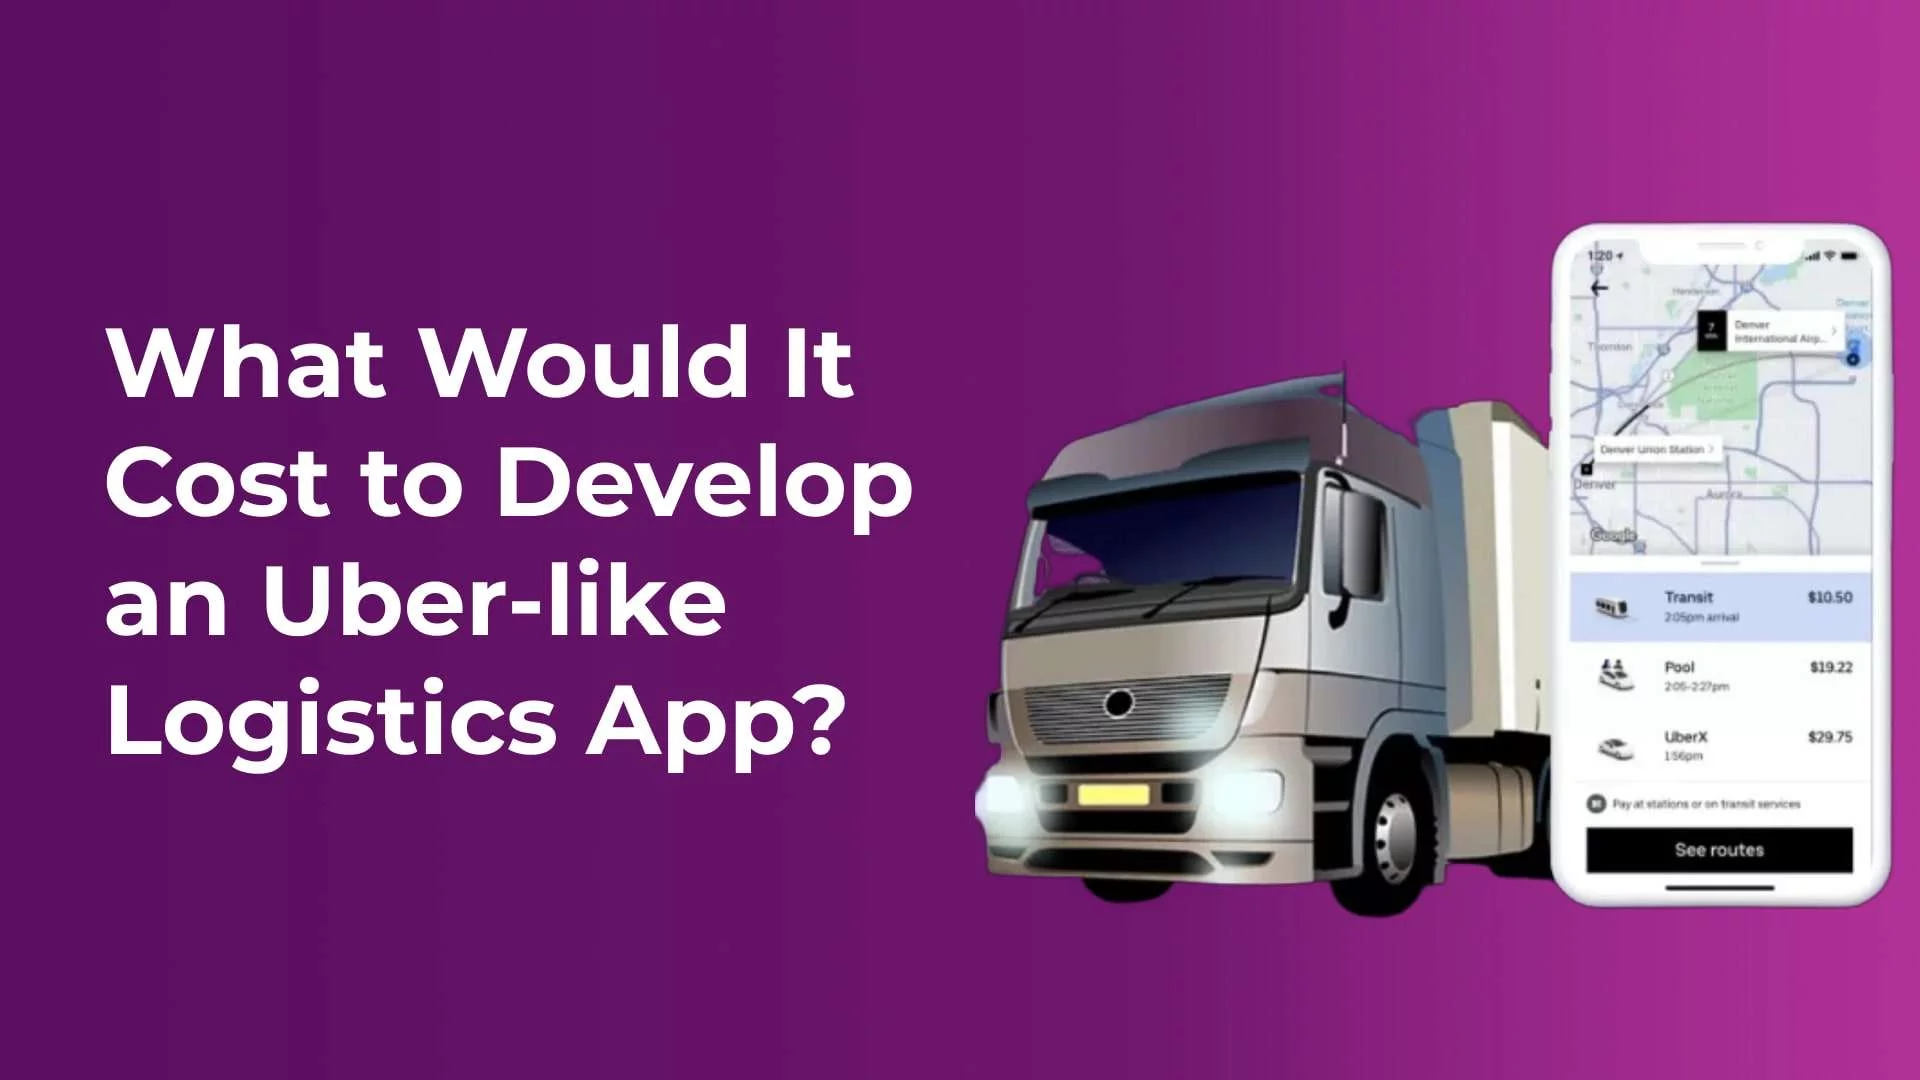 What-Would-It-Cost-to-Develop-an-Uber-like-Logistics-App